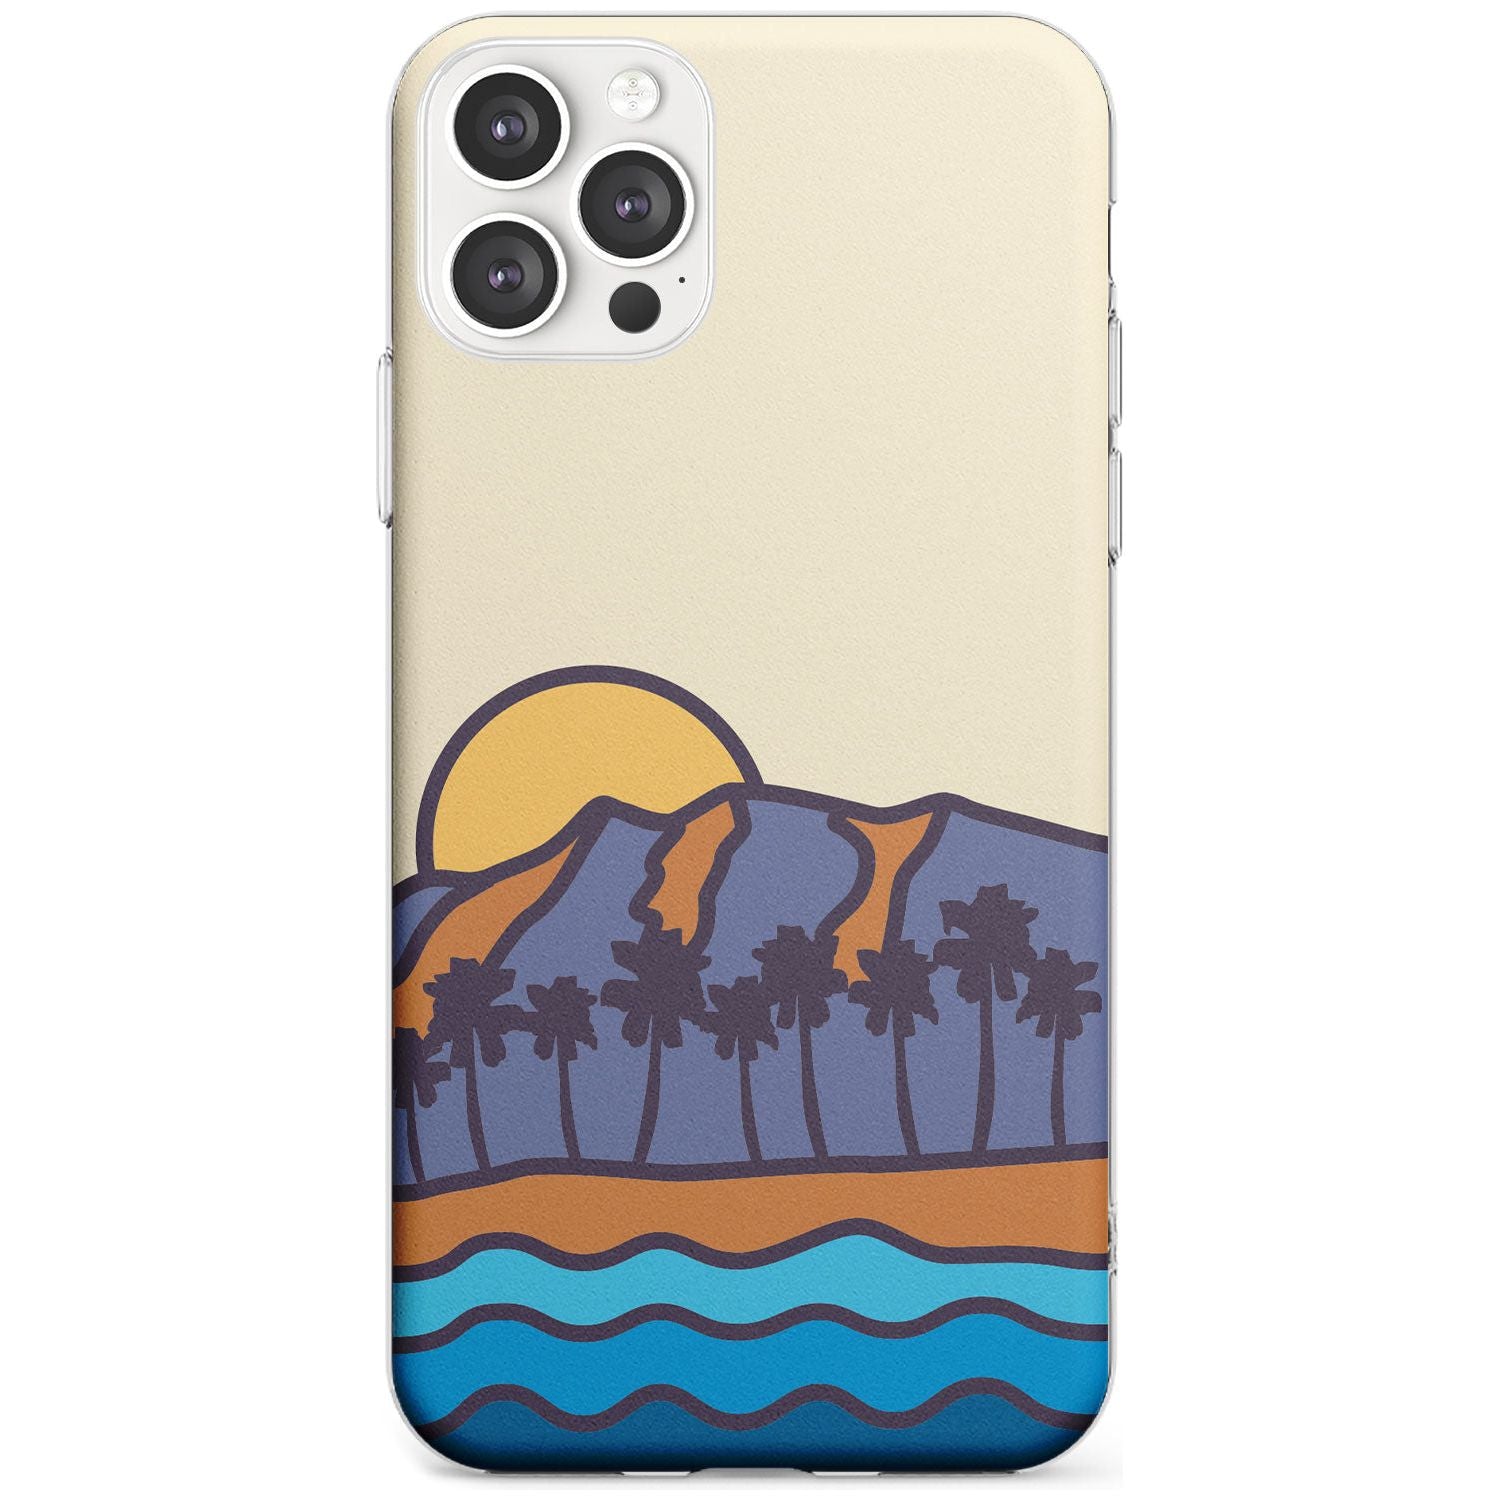 South Sunset Black Impact Phone Case for iPhone 11 Pro Max